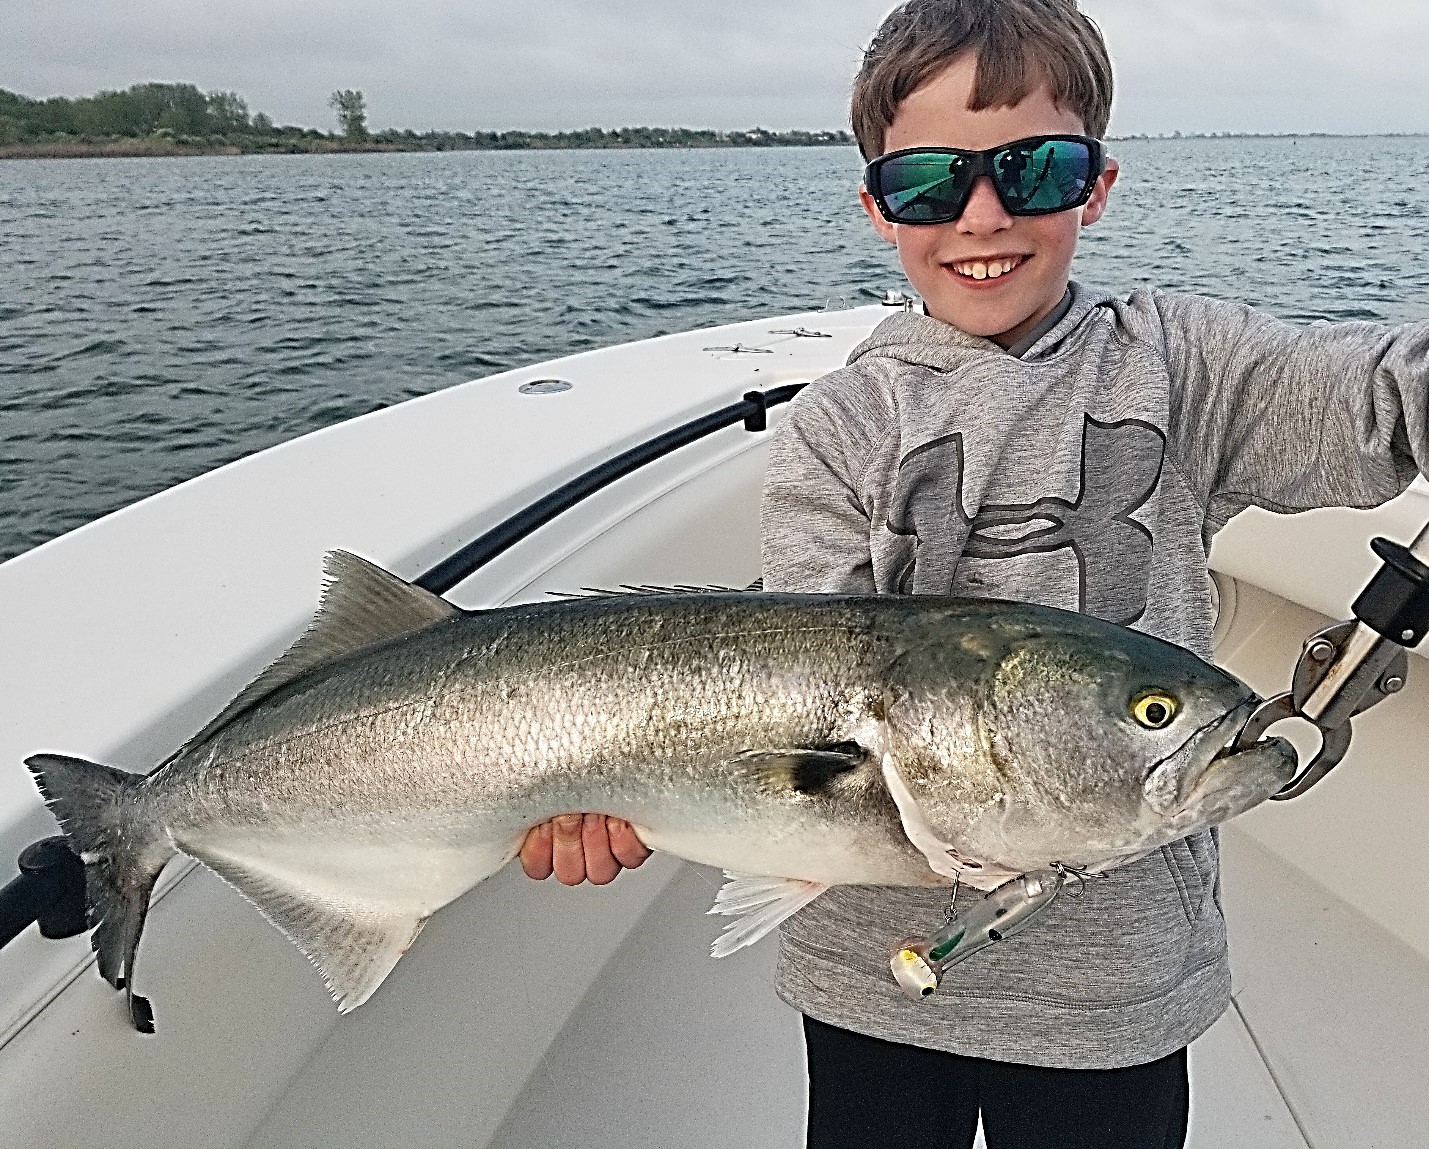 Oliver with bluefish